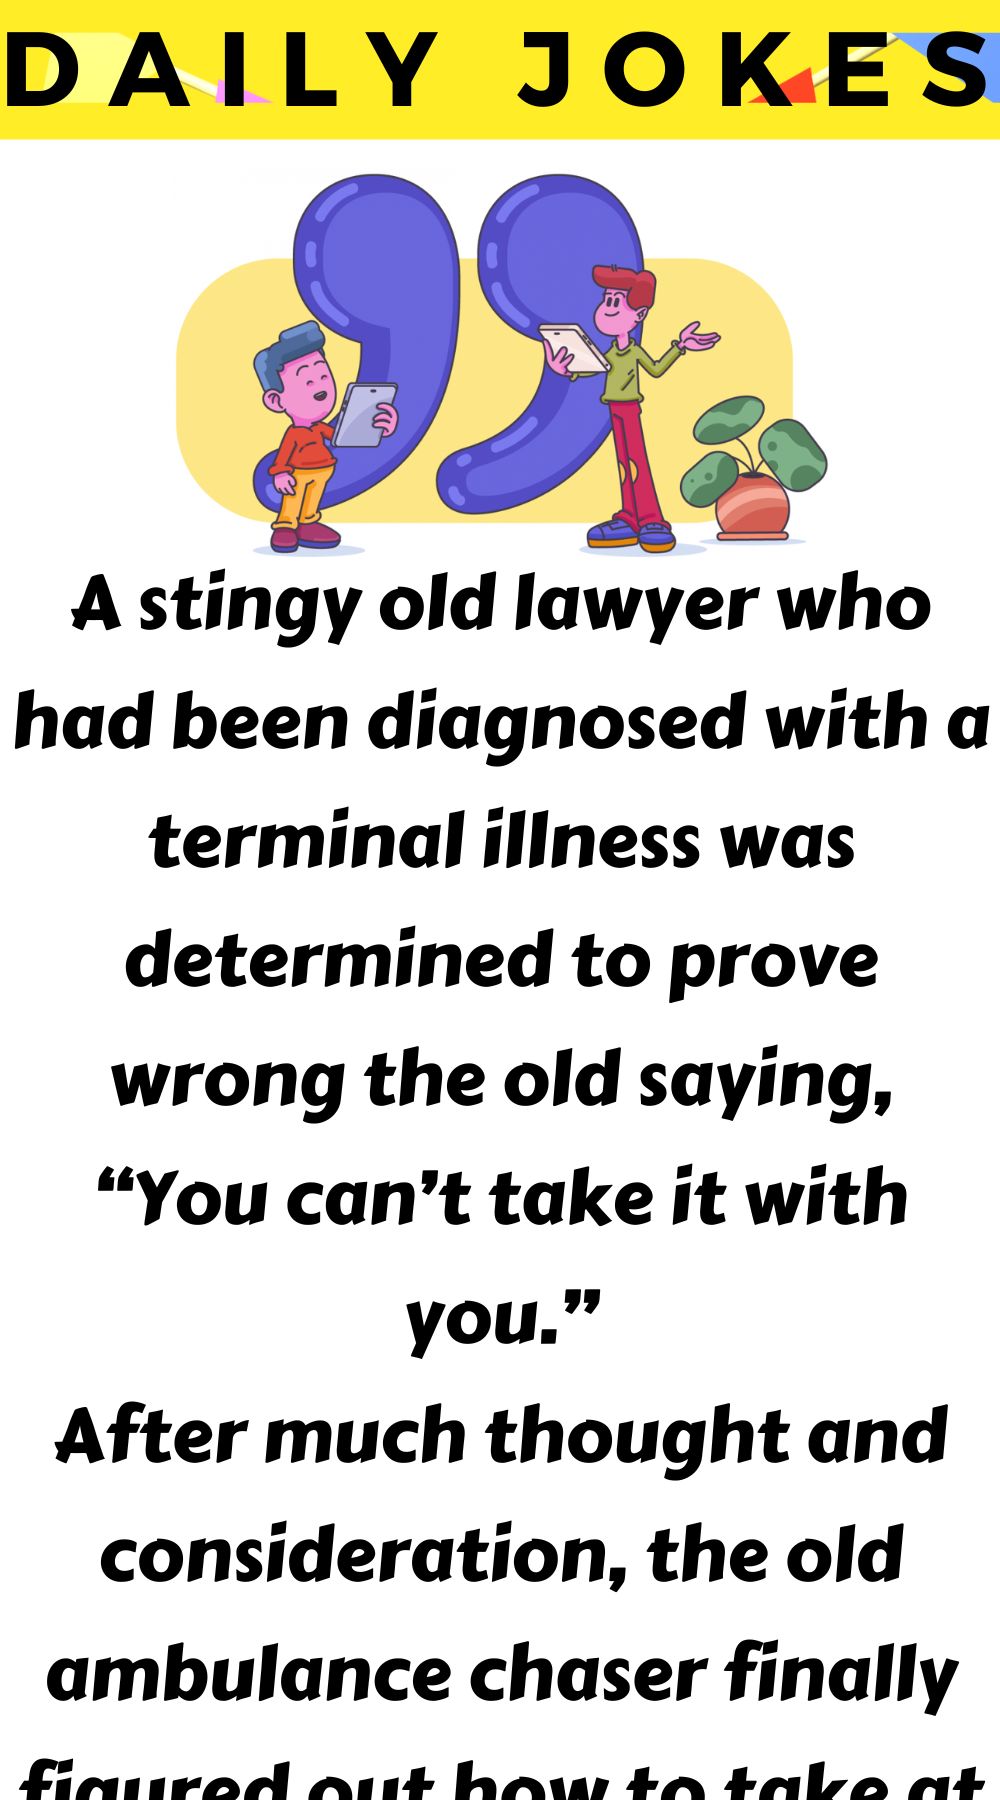 A stingy old lawyer